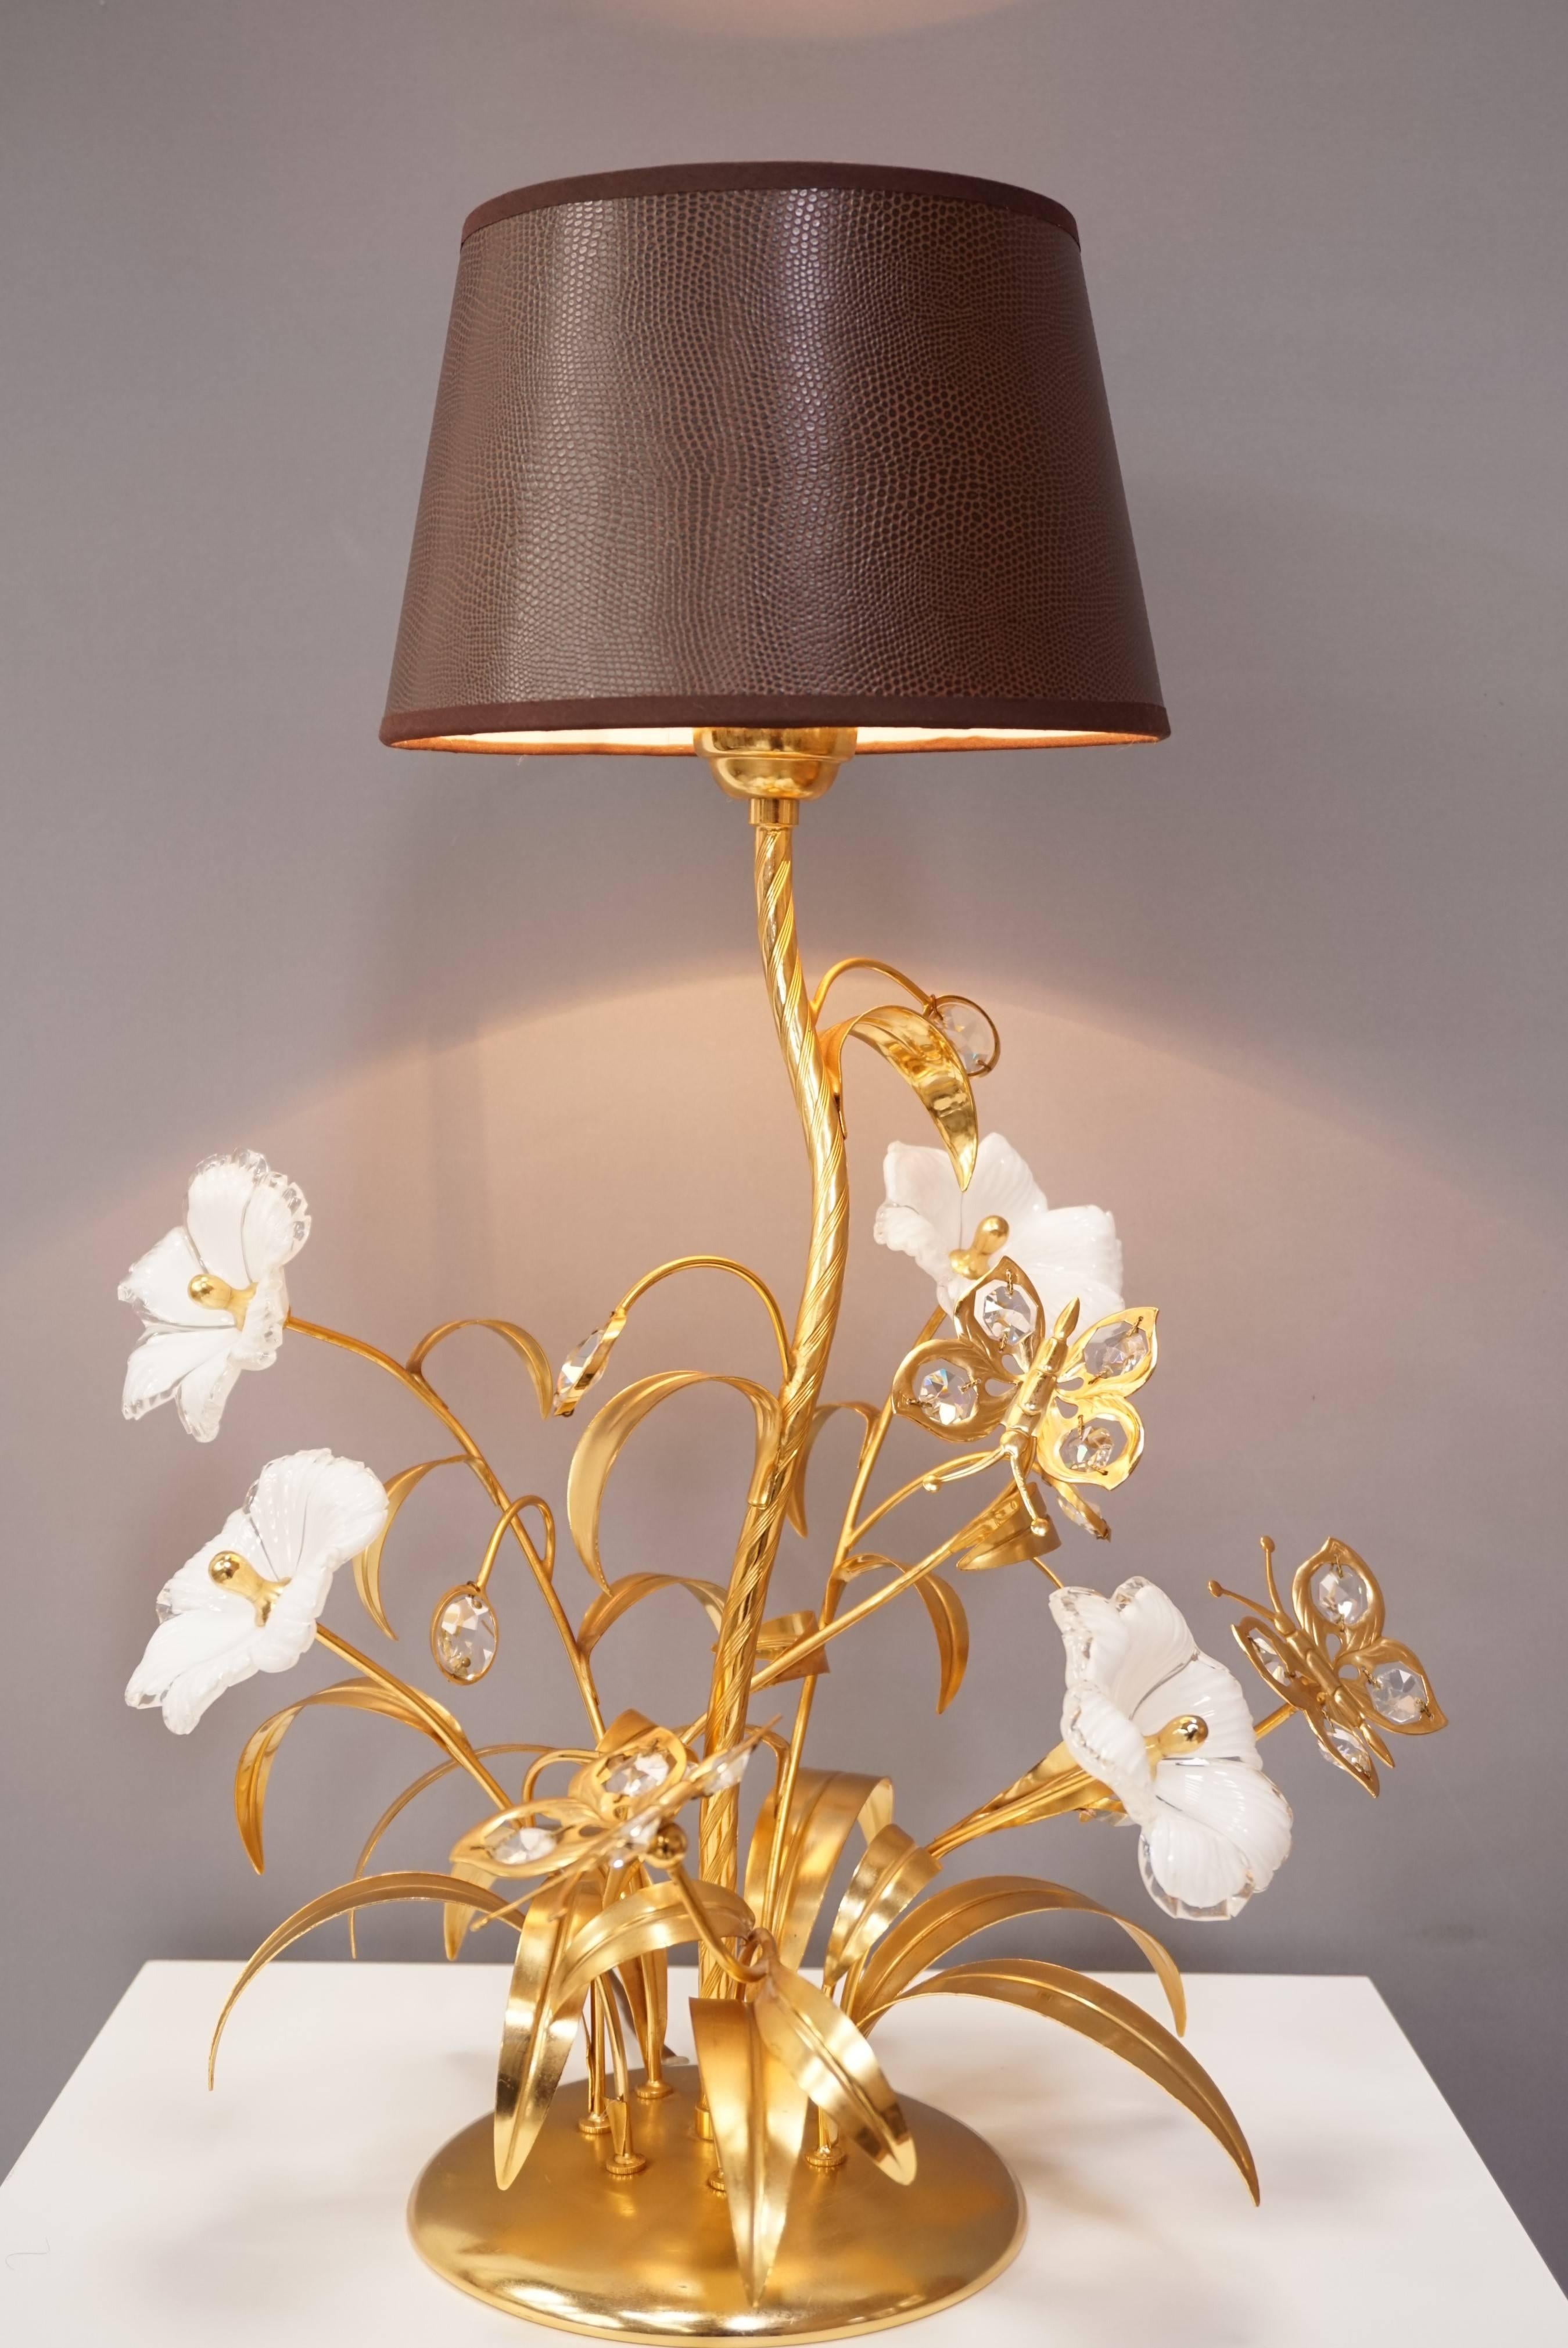 Hollywood Regency style lamp at the manner of Hans Kögl composed of a gilt metal structure and Murano glass flowers with crystal butterflies. So bucolic, so poetic and i goo state of conservation.